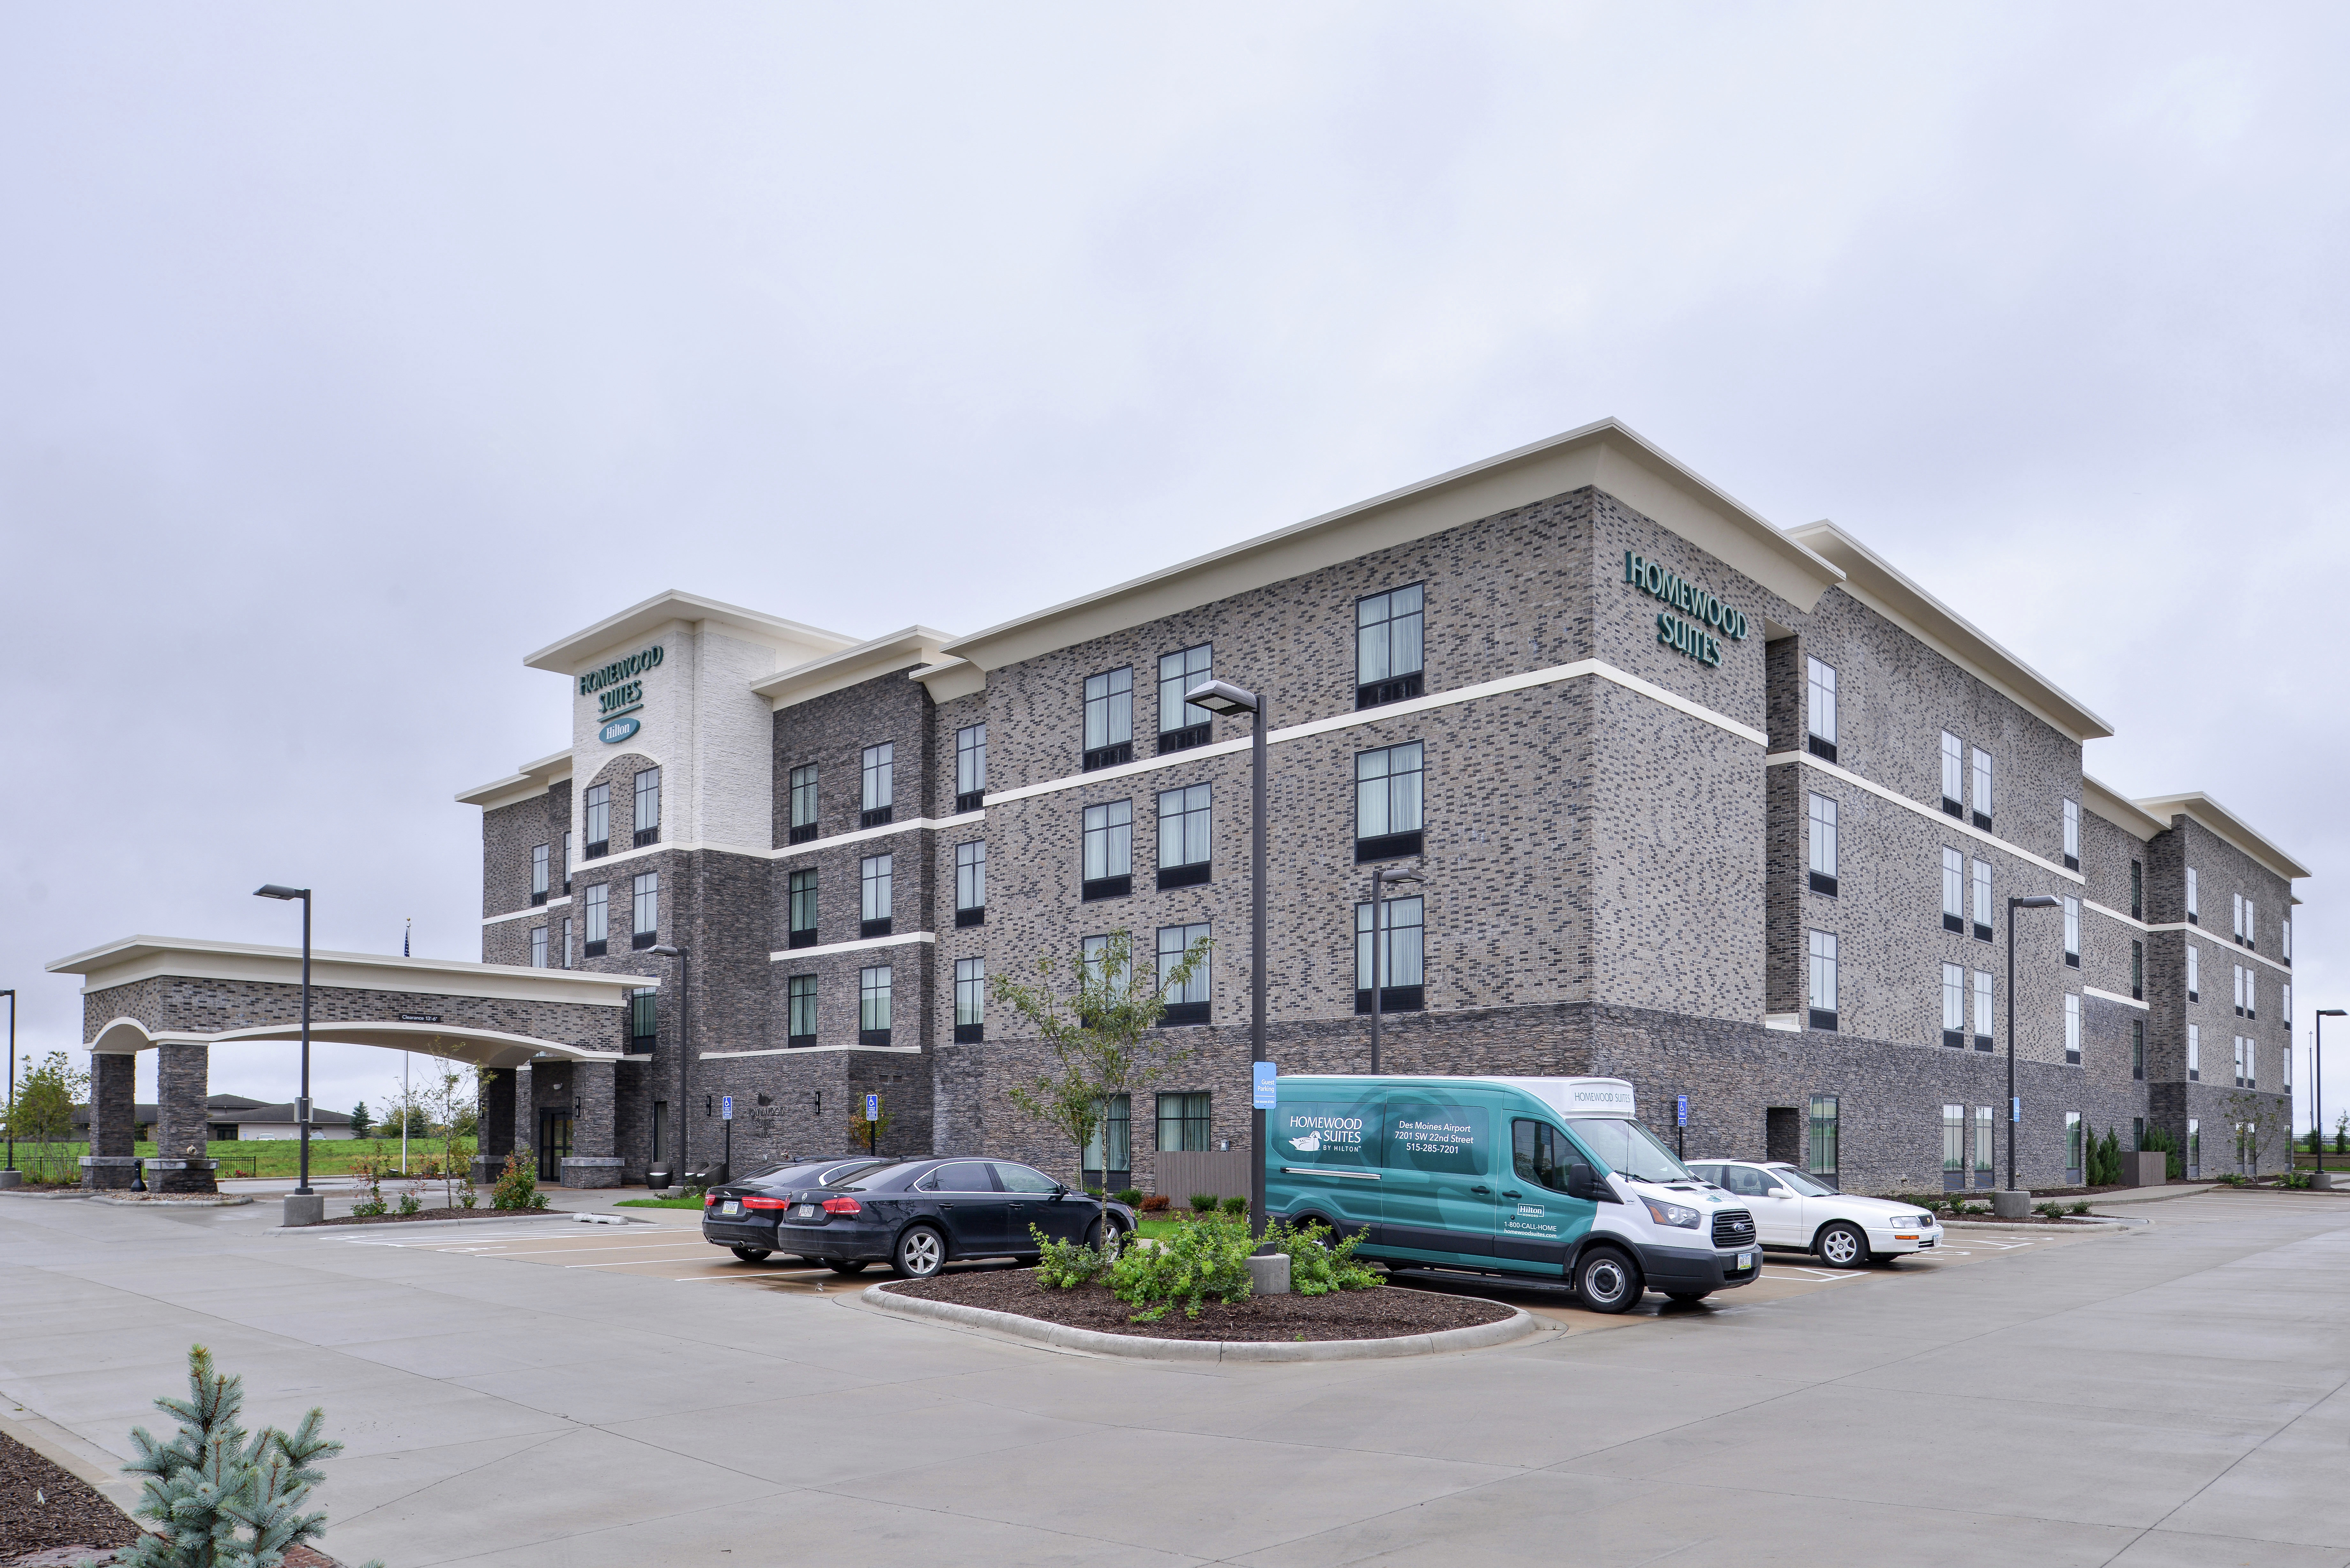 Daytime View of Hotel Exterior with Cars in Parking Lot